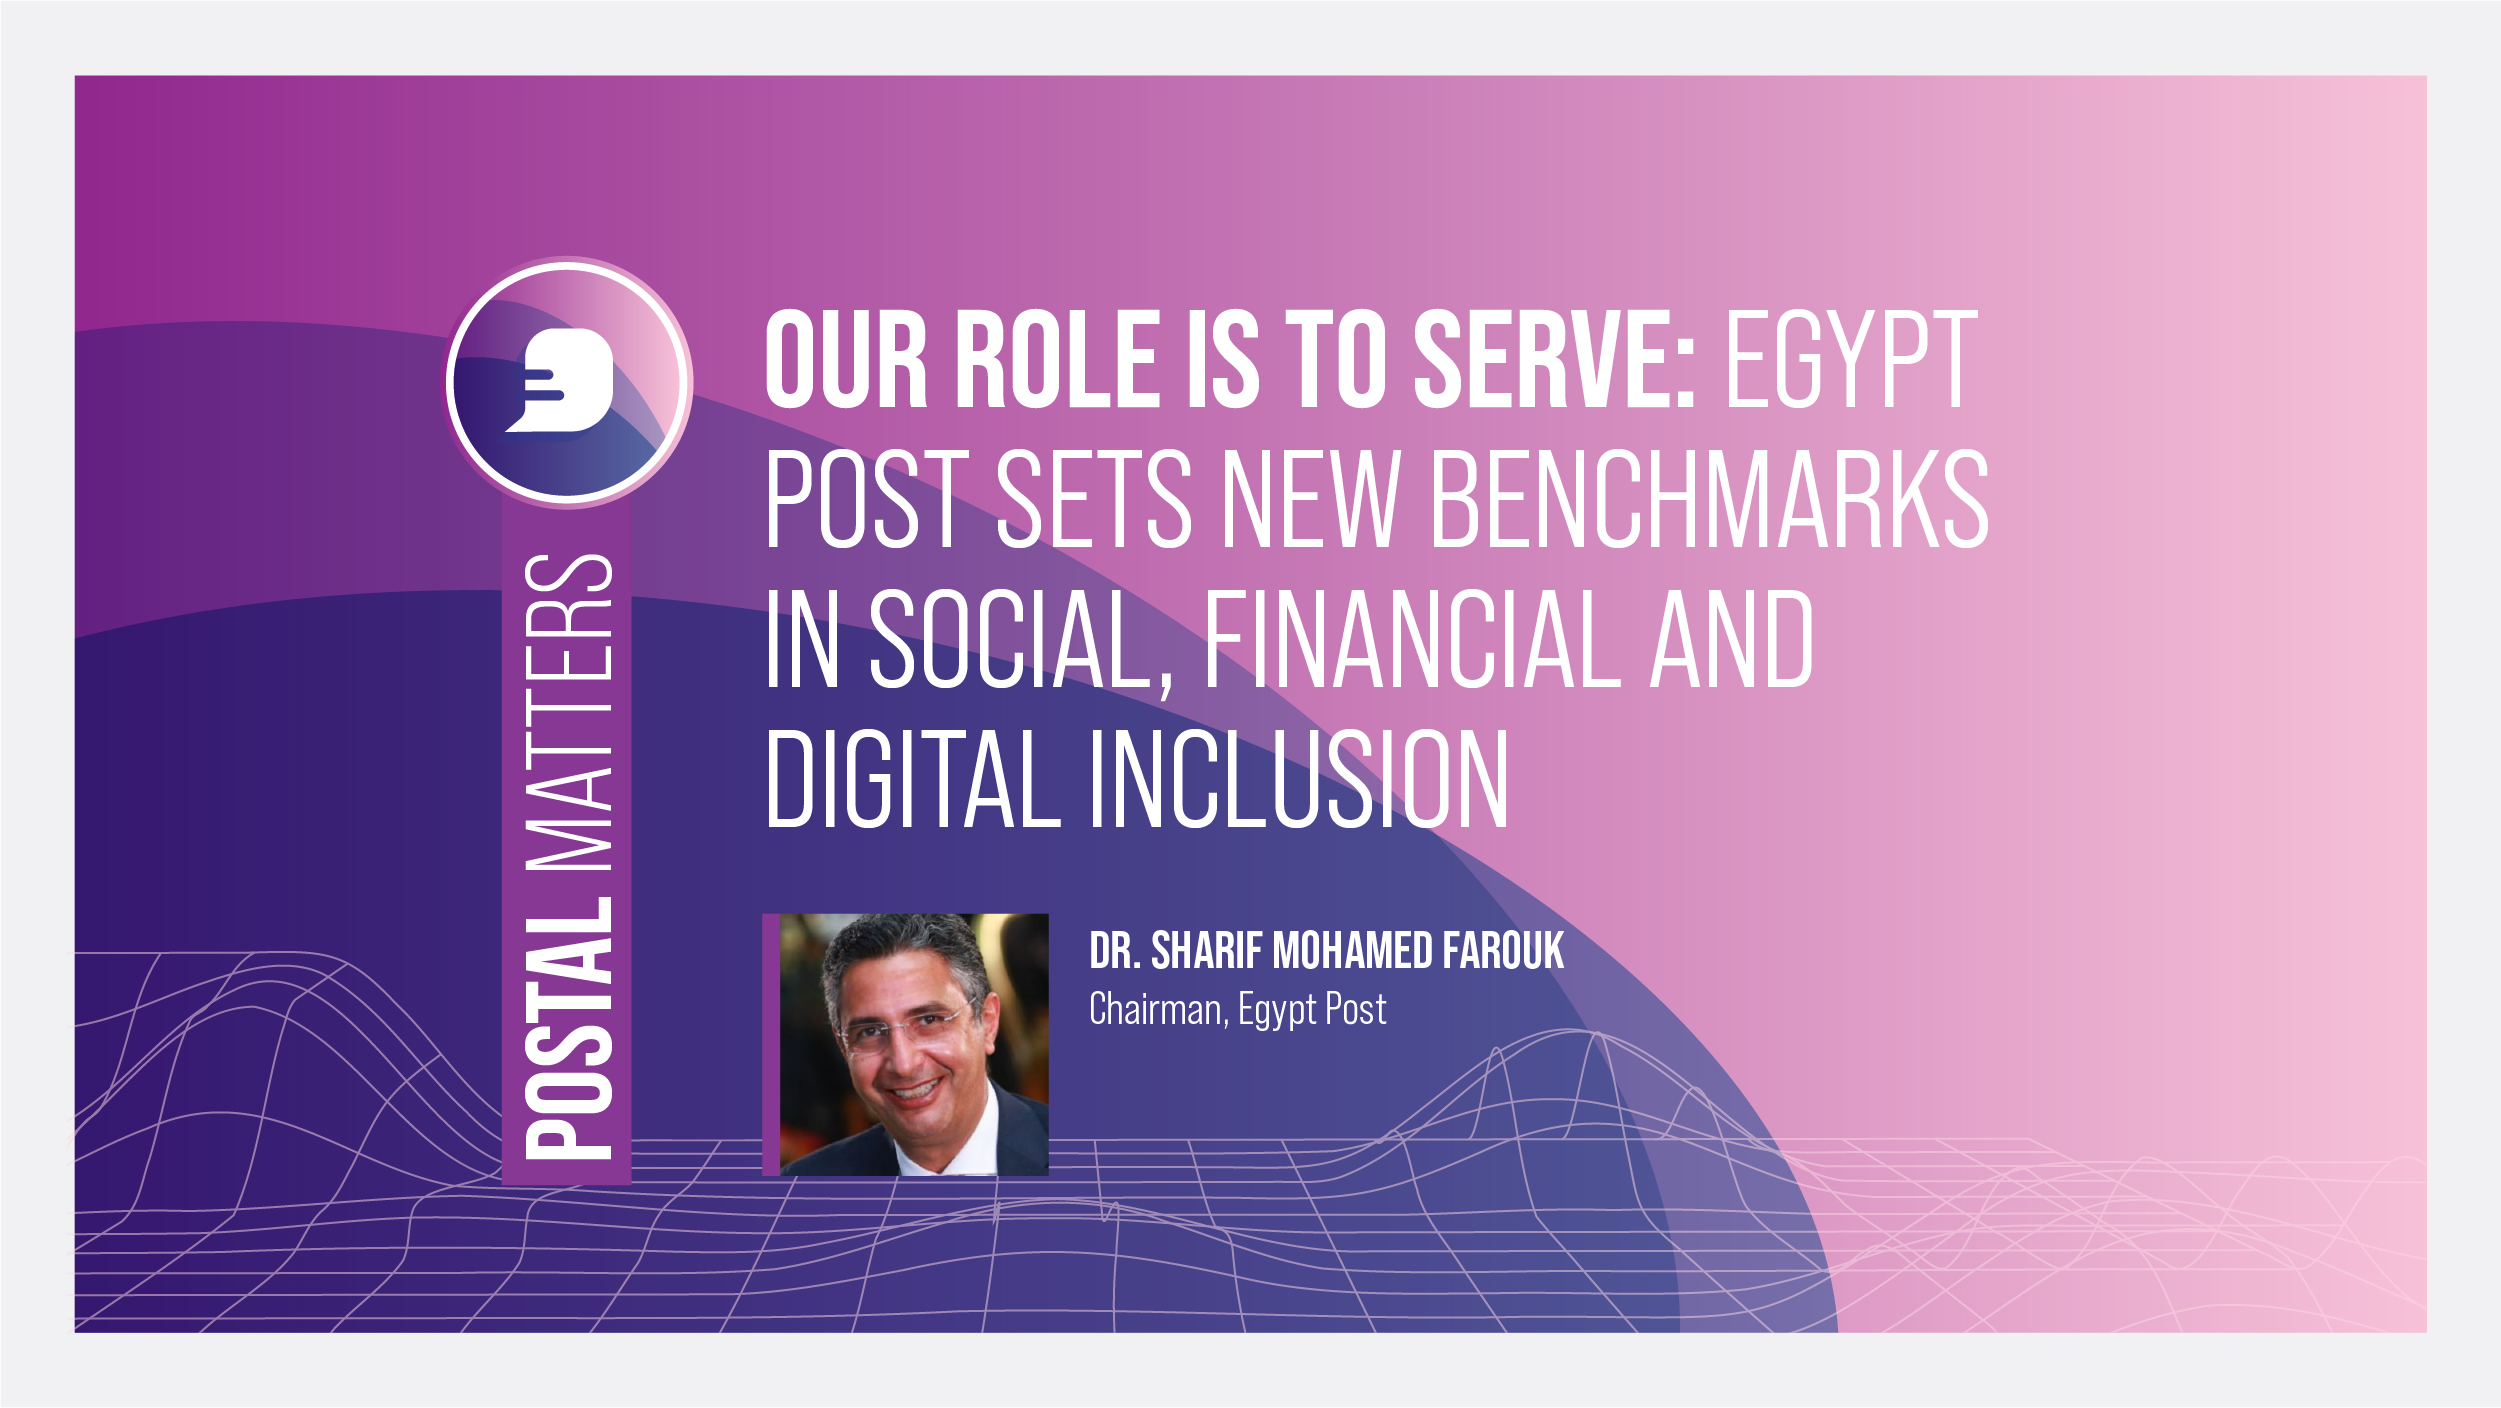 Our role is to serve: Egypt Post sets new benchmarks in social, financial and digital inclusion